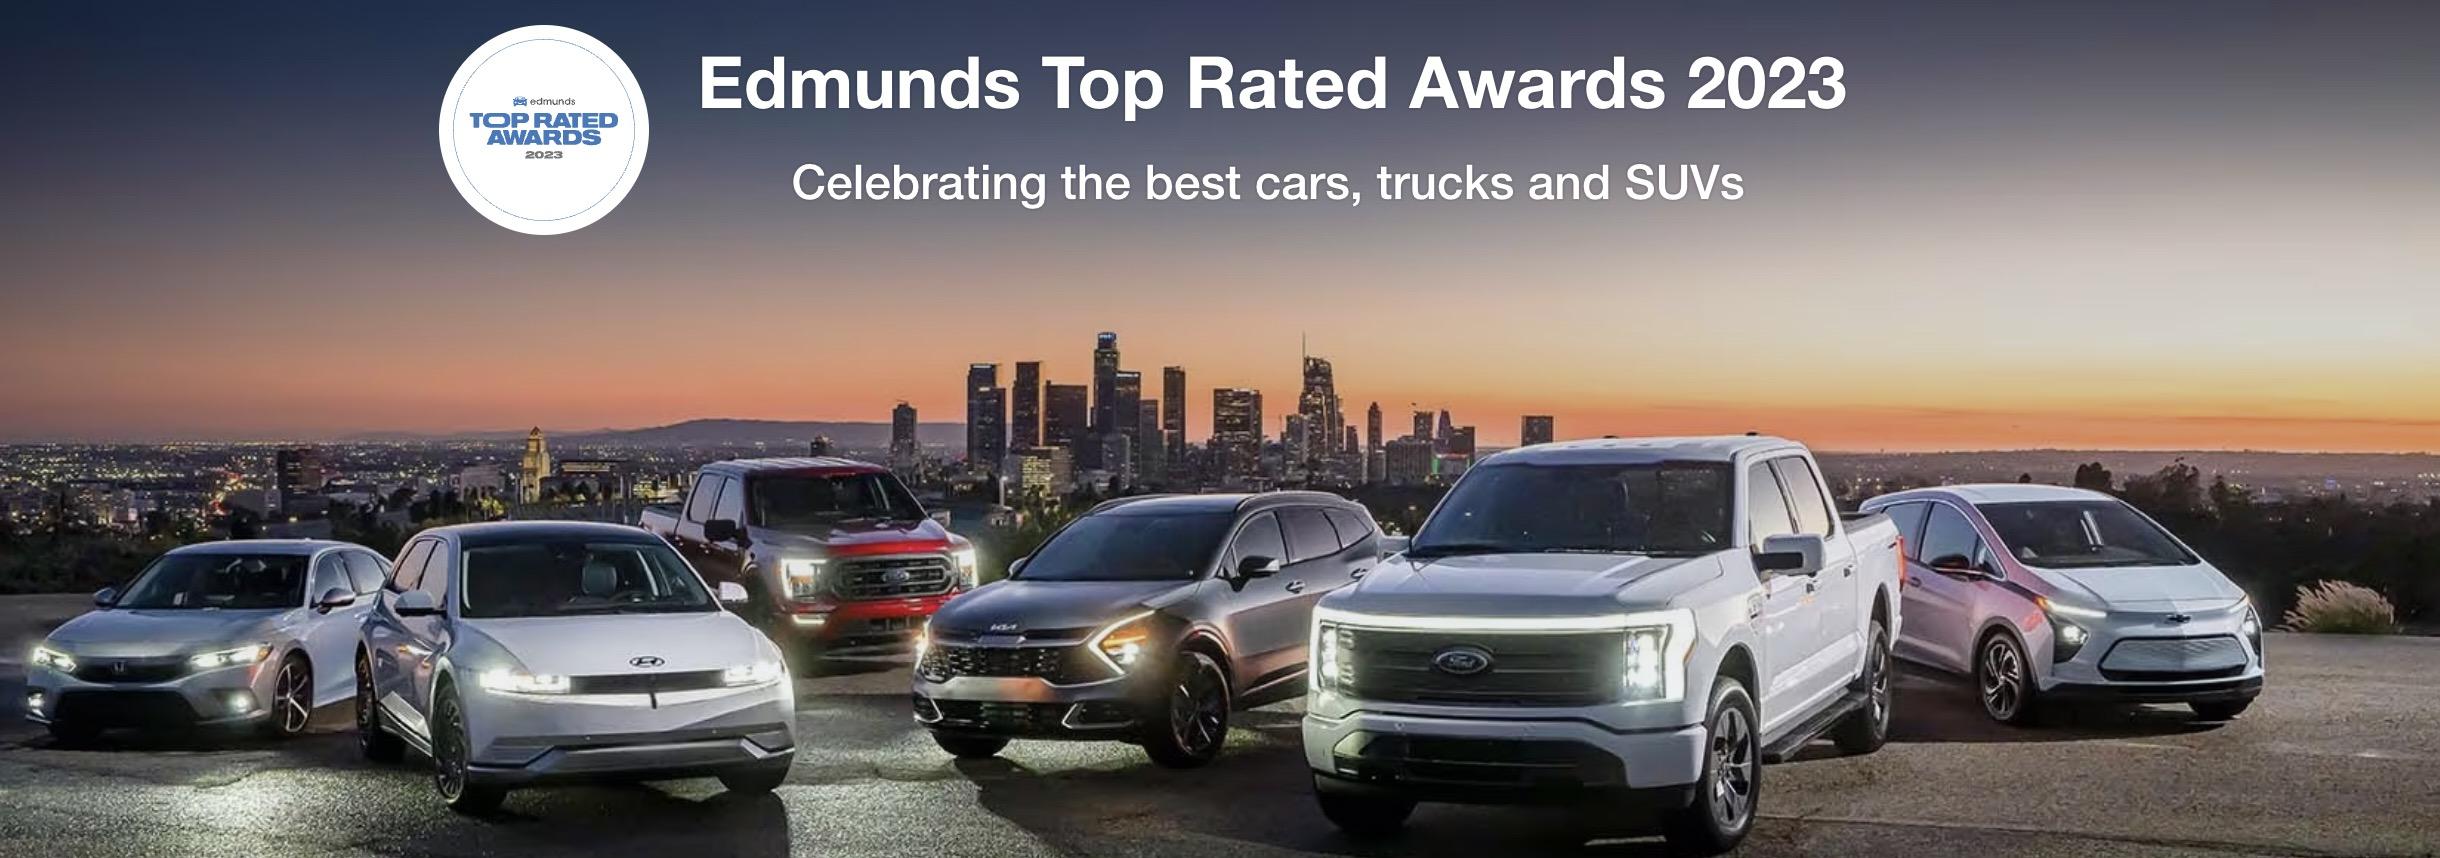 Ford F-150 Lightning 🥇 Ford F-150 Lightning is a Edmunds Top Rated Awards 2023 Winner Screenshot 2023-01-18 at 6.19.47 AM